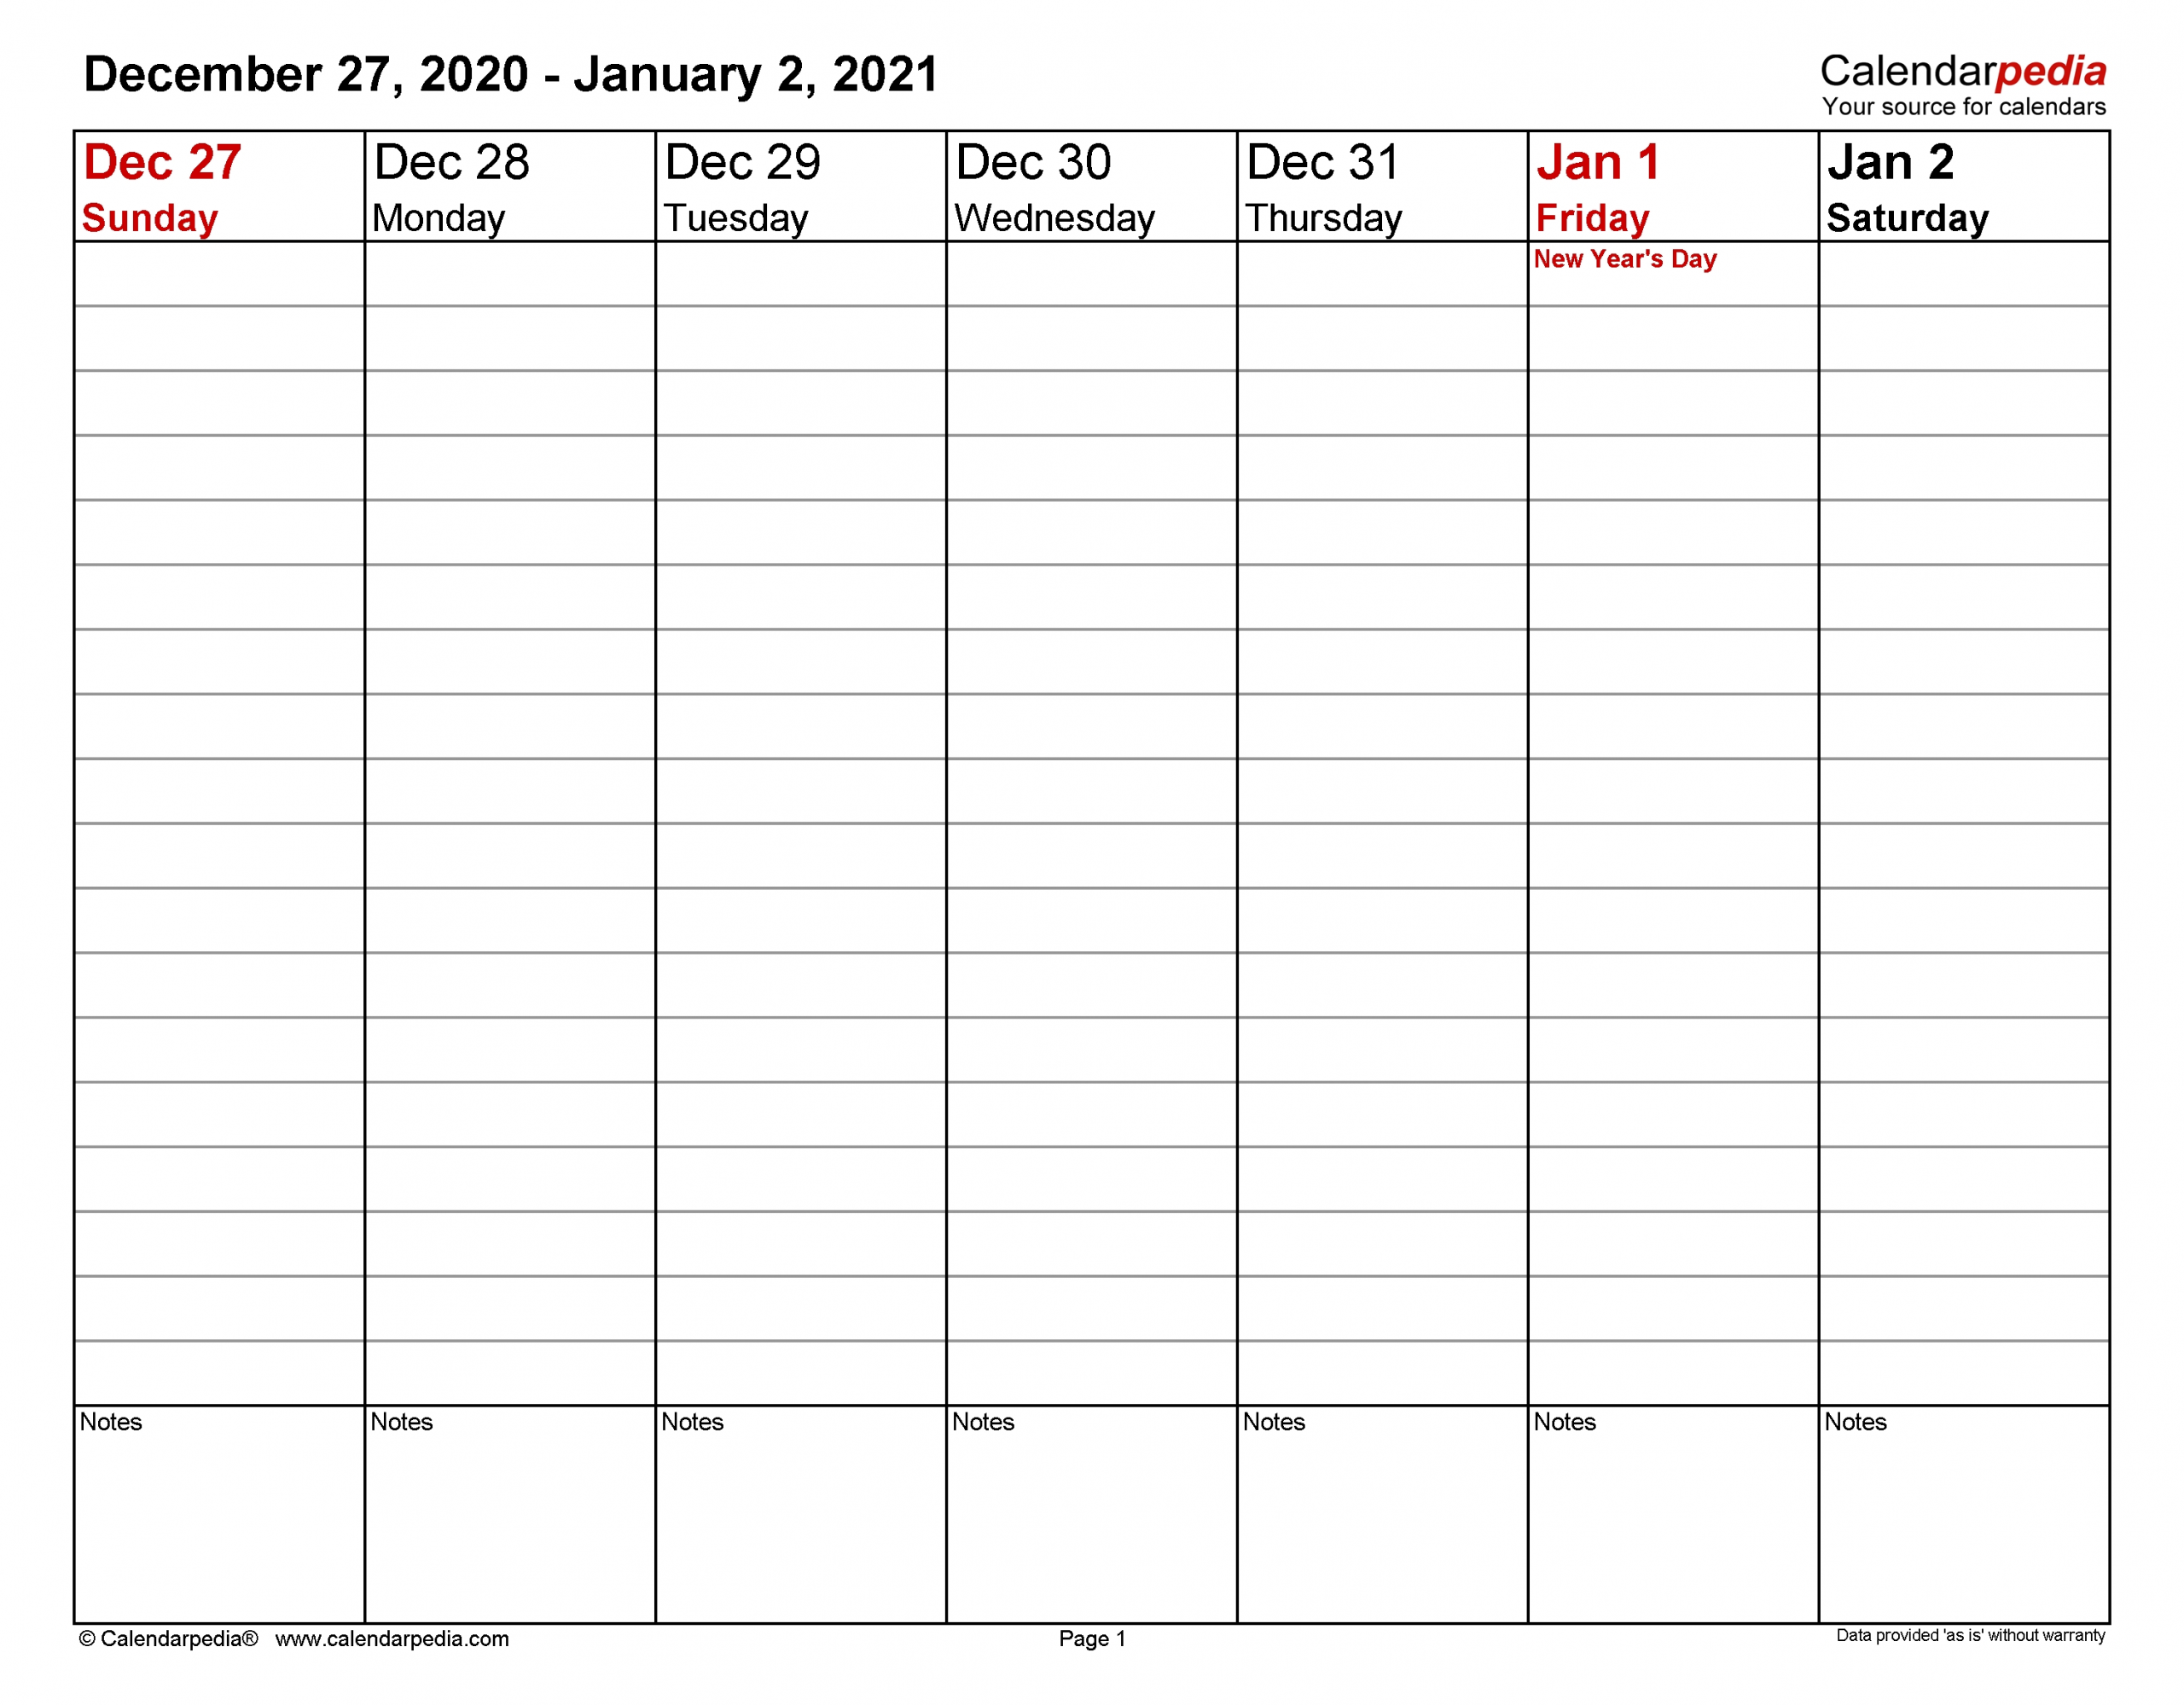 Weekly Calendars 2021 For Excel - 12 Free Printable Templates